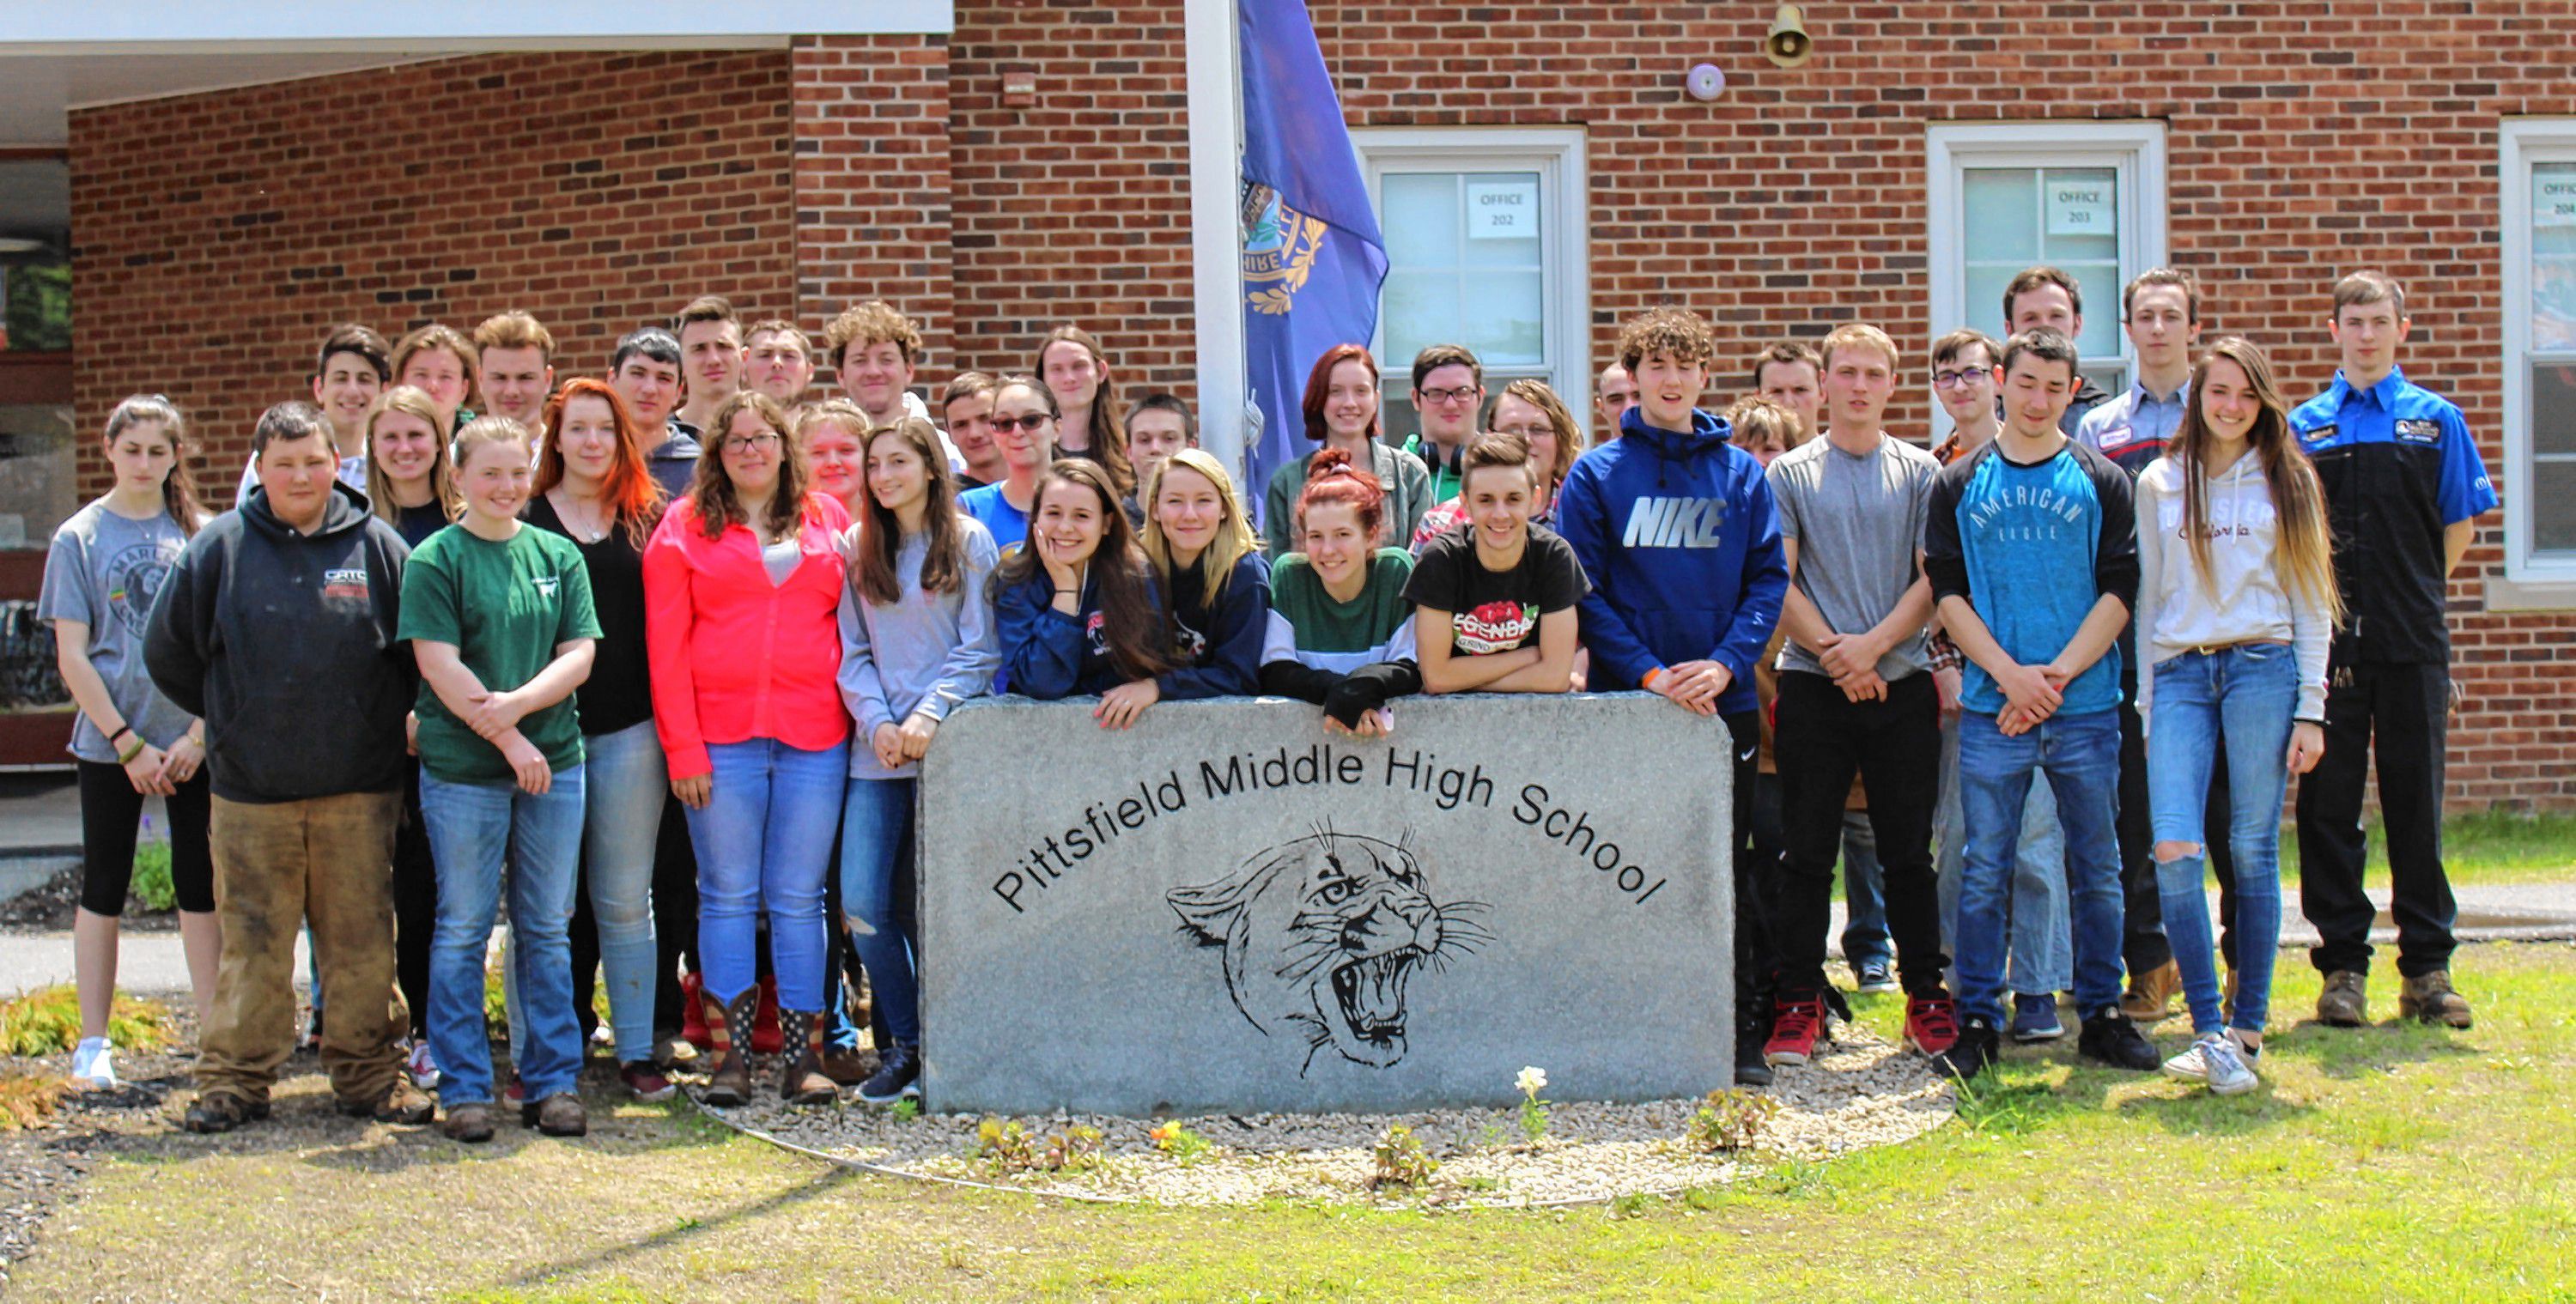 Pittsfield Middle High School Class of 2019. Courtesy of Pittsfield Middle High School